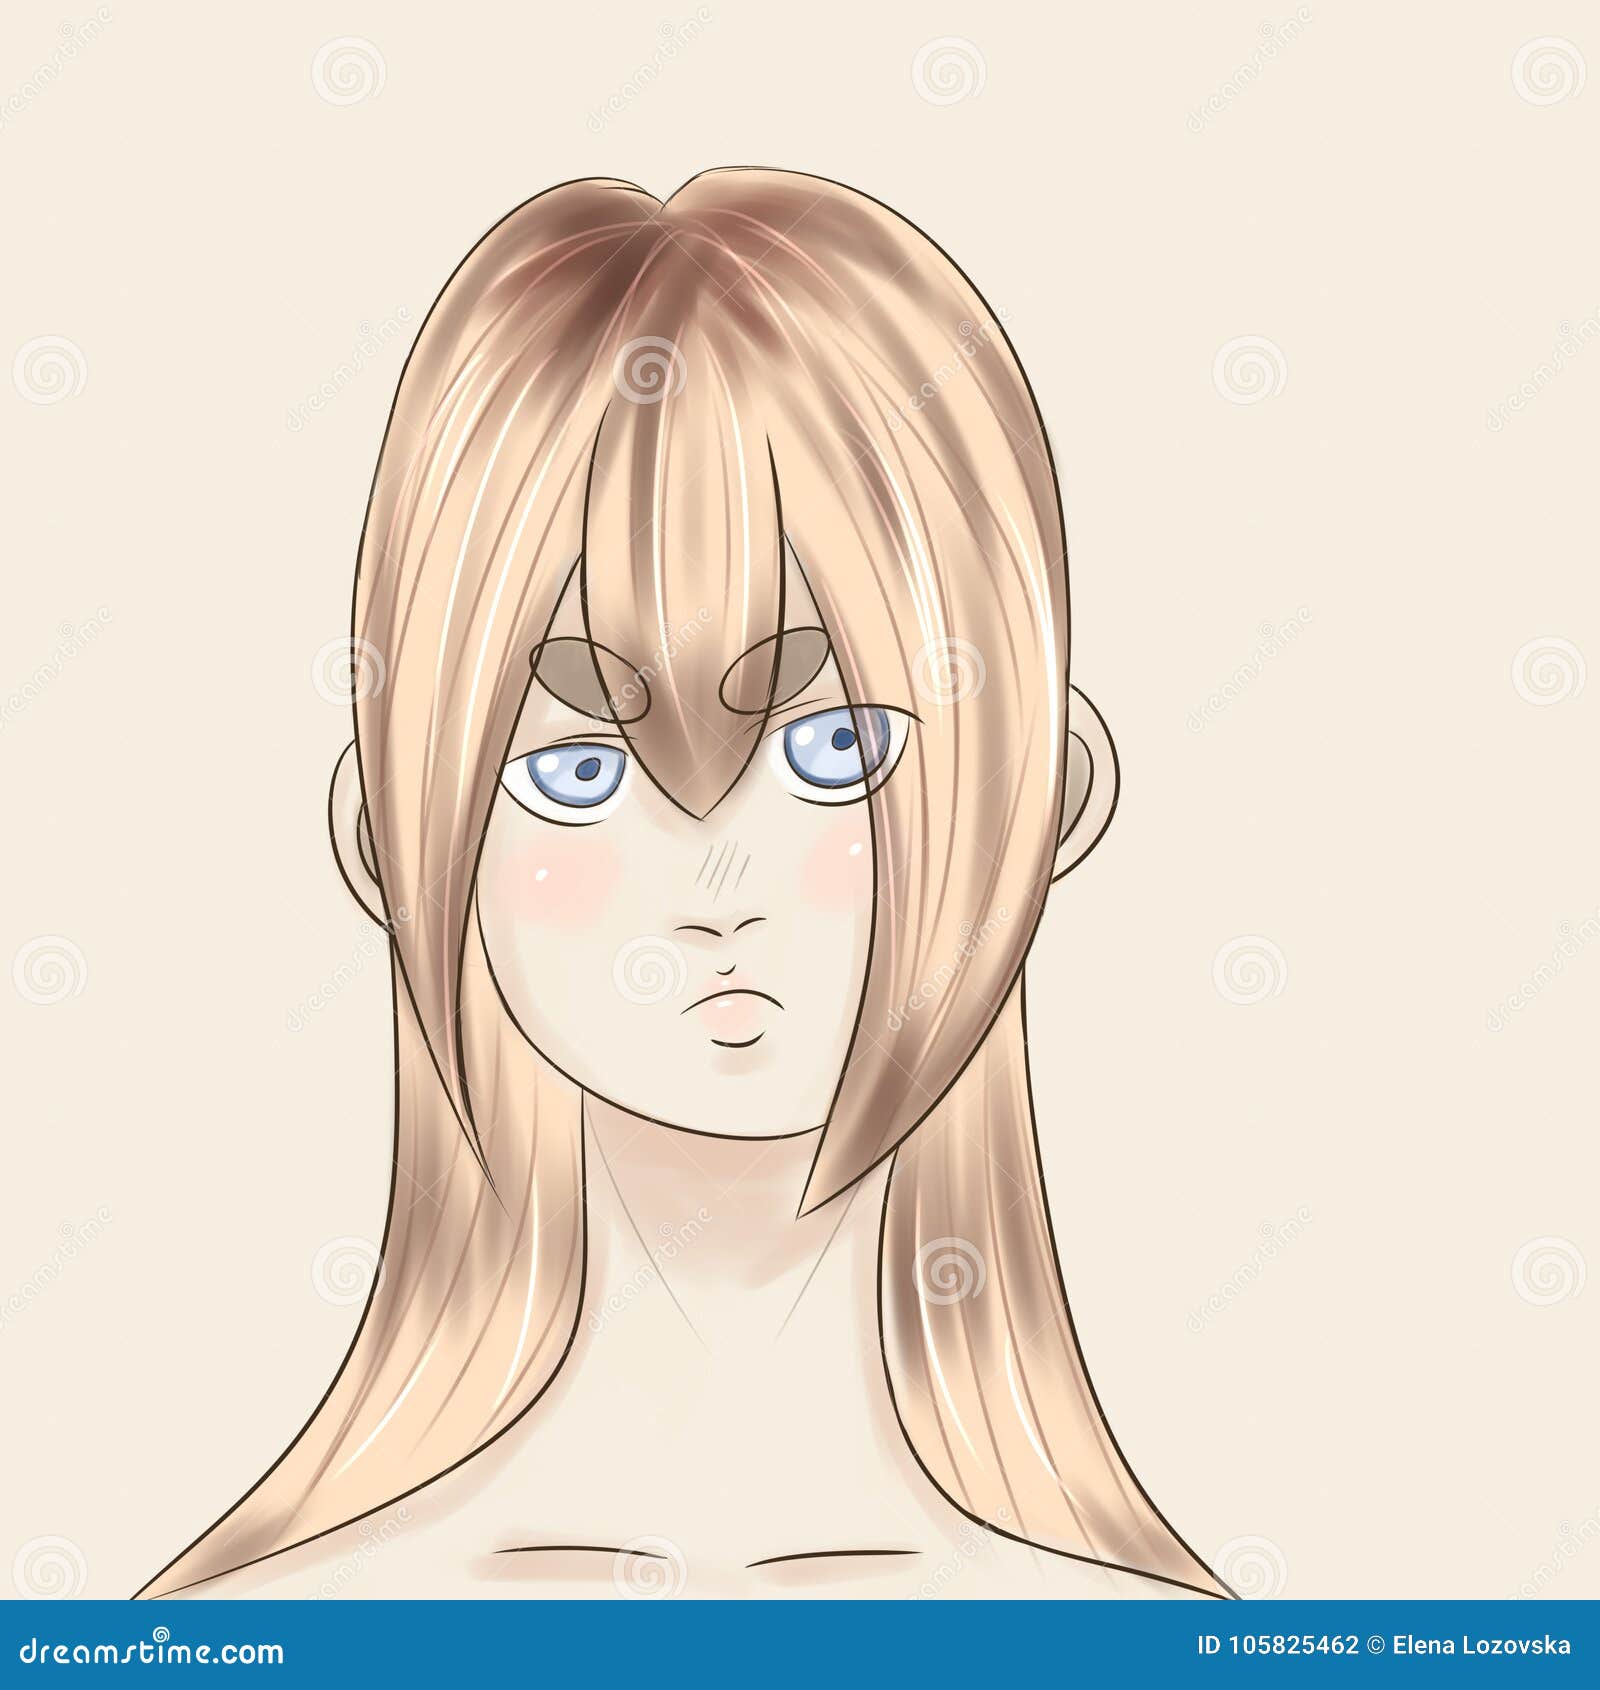 A Portrait Of A Girl Drawn In An Anime Style Stock Illustration